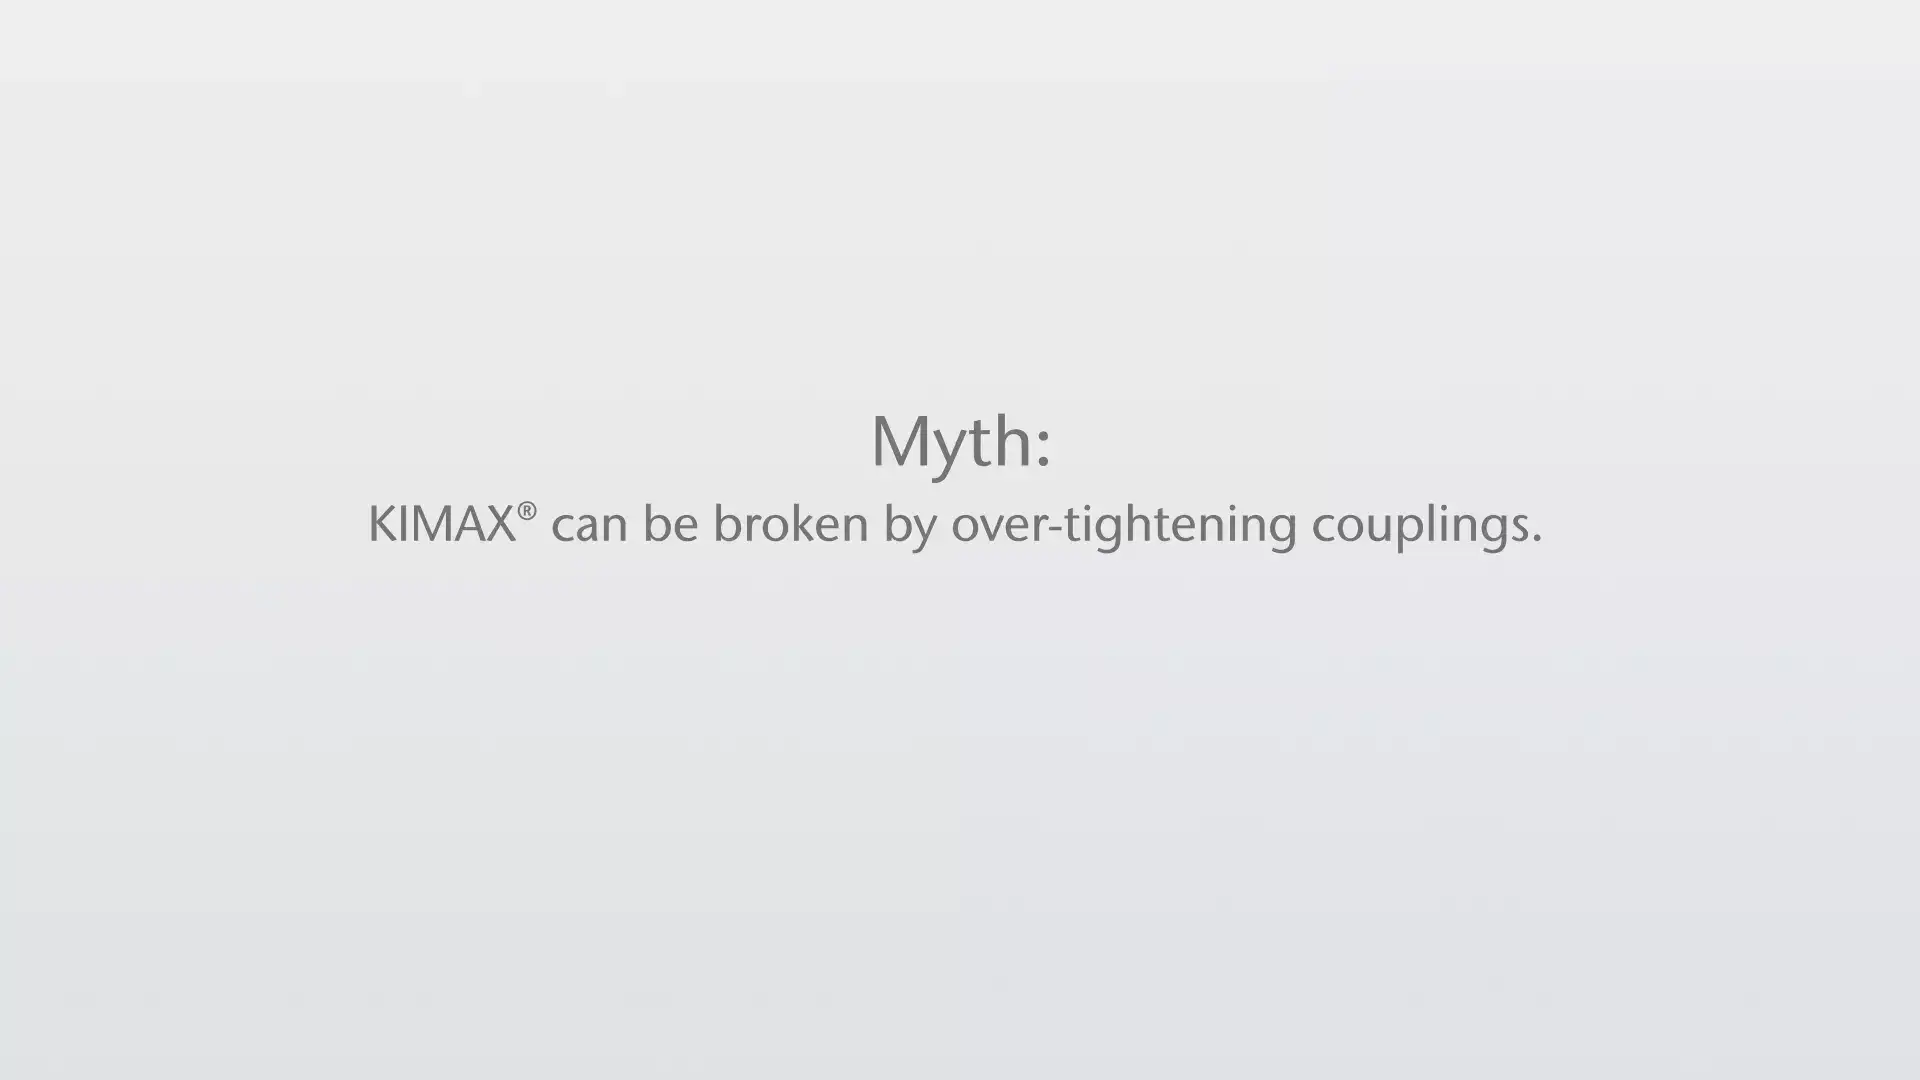 Thumbnail_KIMAX Myths & Truths-KIMAX can be broken by over-tightening couplings.png